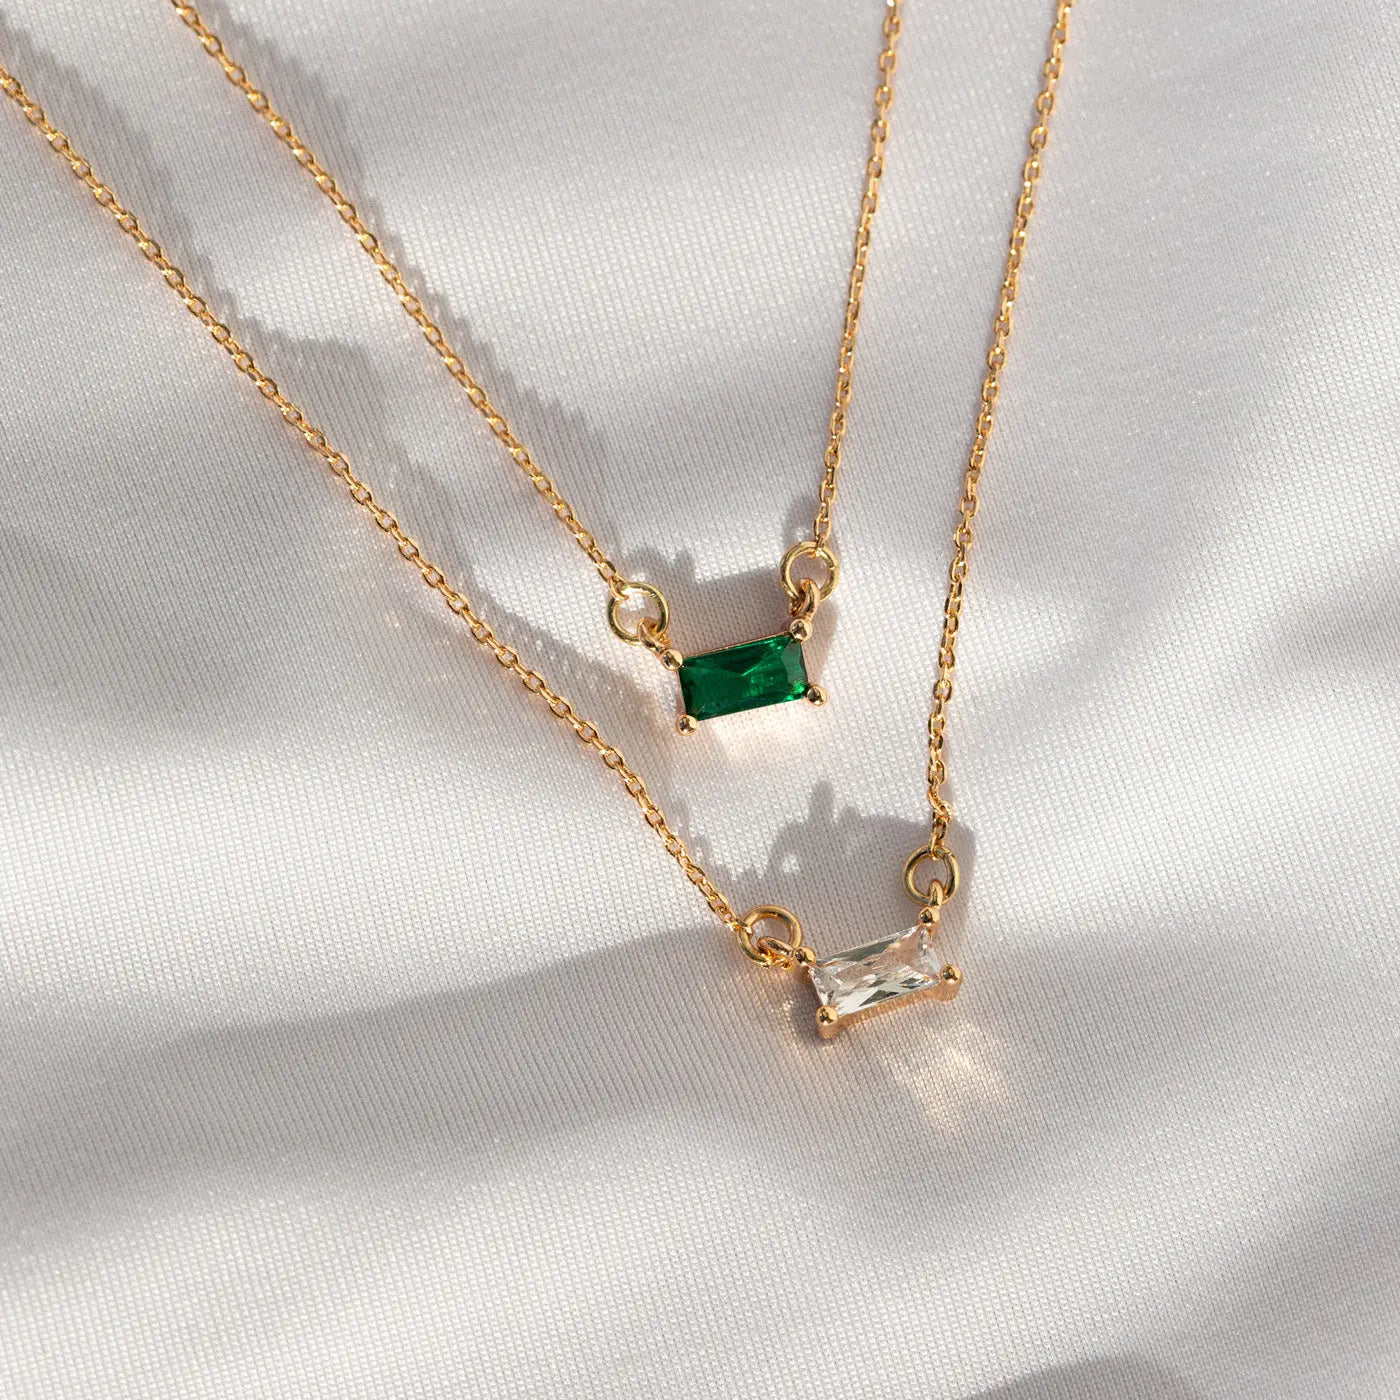 Necklace with Rectangular Crystal - Green